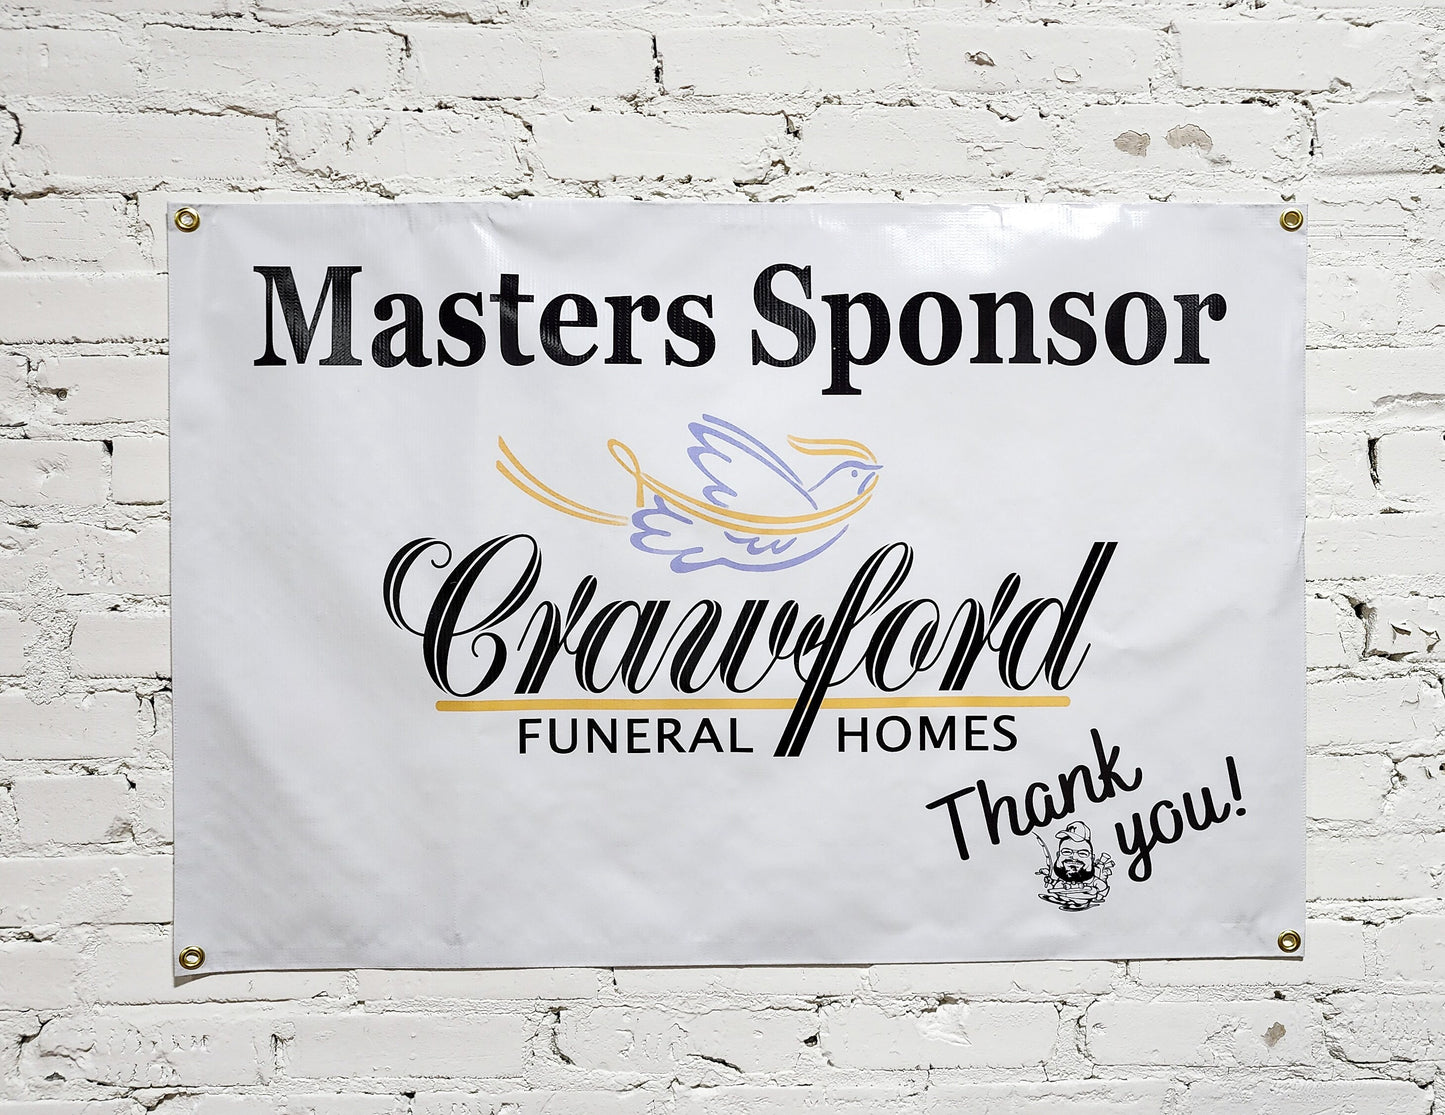 Sponsor Banner for community events, Sponsorshipship, Or Personalized Custom Text, Logo, Campaigns, Ads, Full Color Indoor Outdoor Print